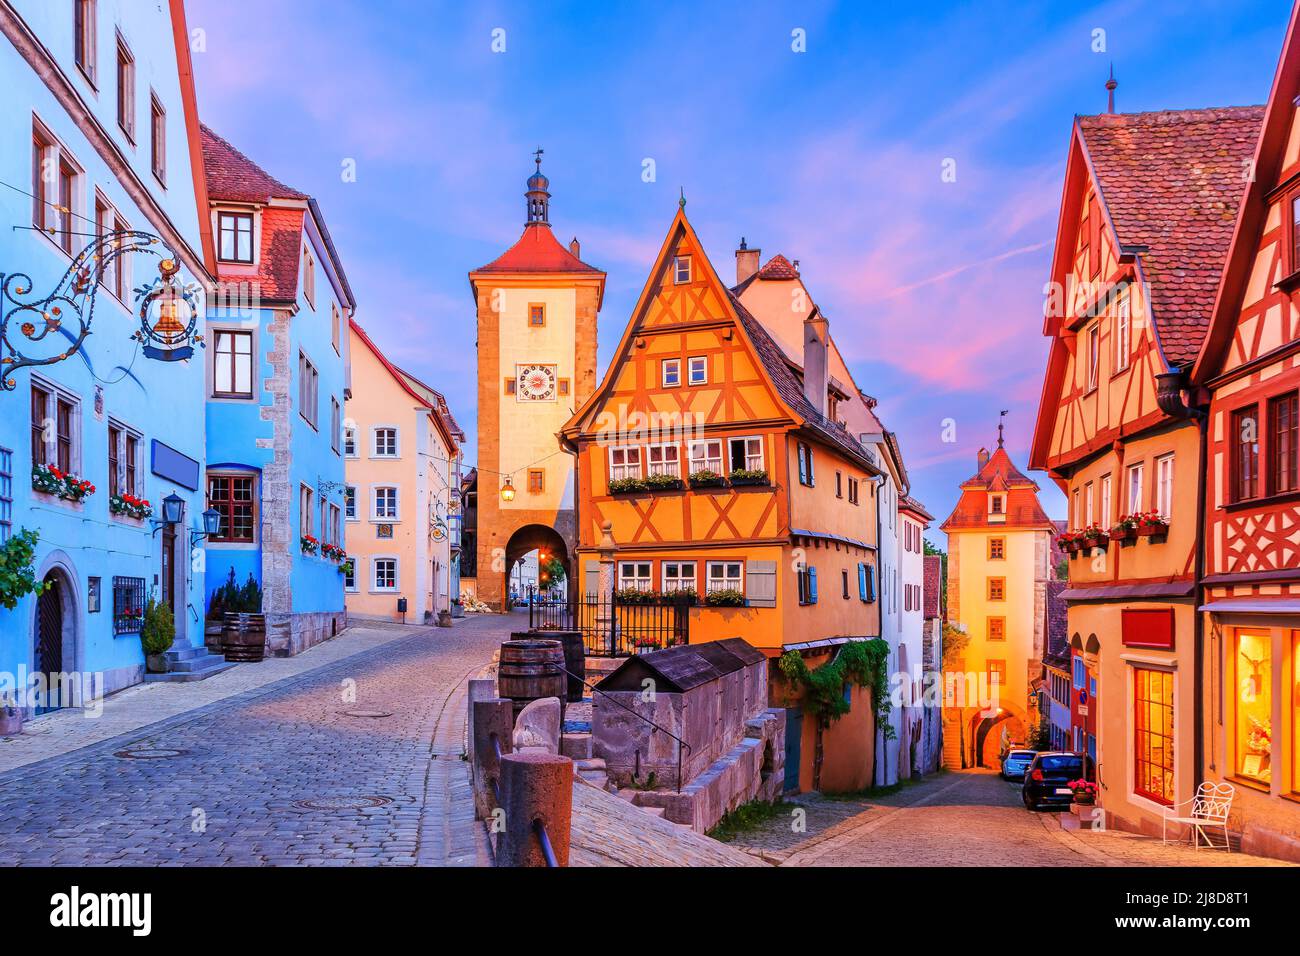 Rothenburg ob der Tauber, Bavaria, Germany. Medieval town of Rothenburg at night. Plonlein(Little Square) and the two towers of the old city wall. Stock Photo